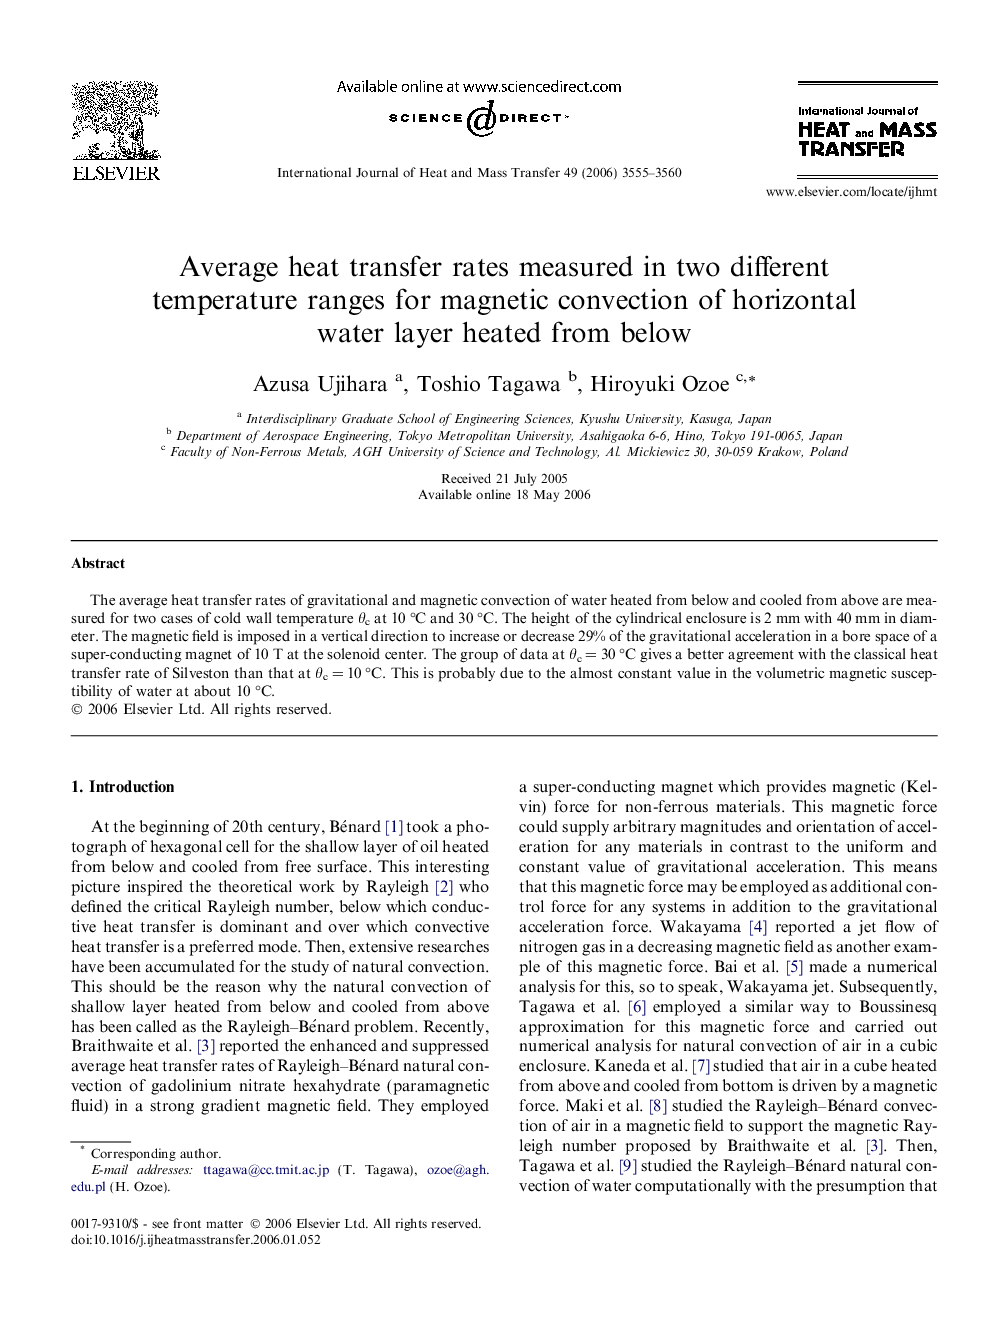 Average heat transfer rates measured in two different temperature ranges for magnetic convection of horizontal water layer heated from below